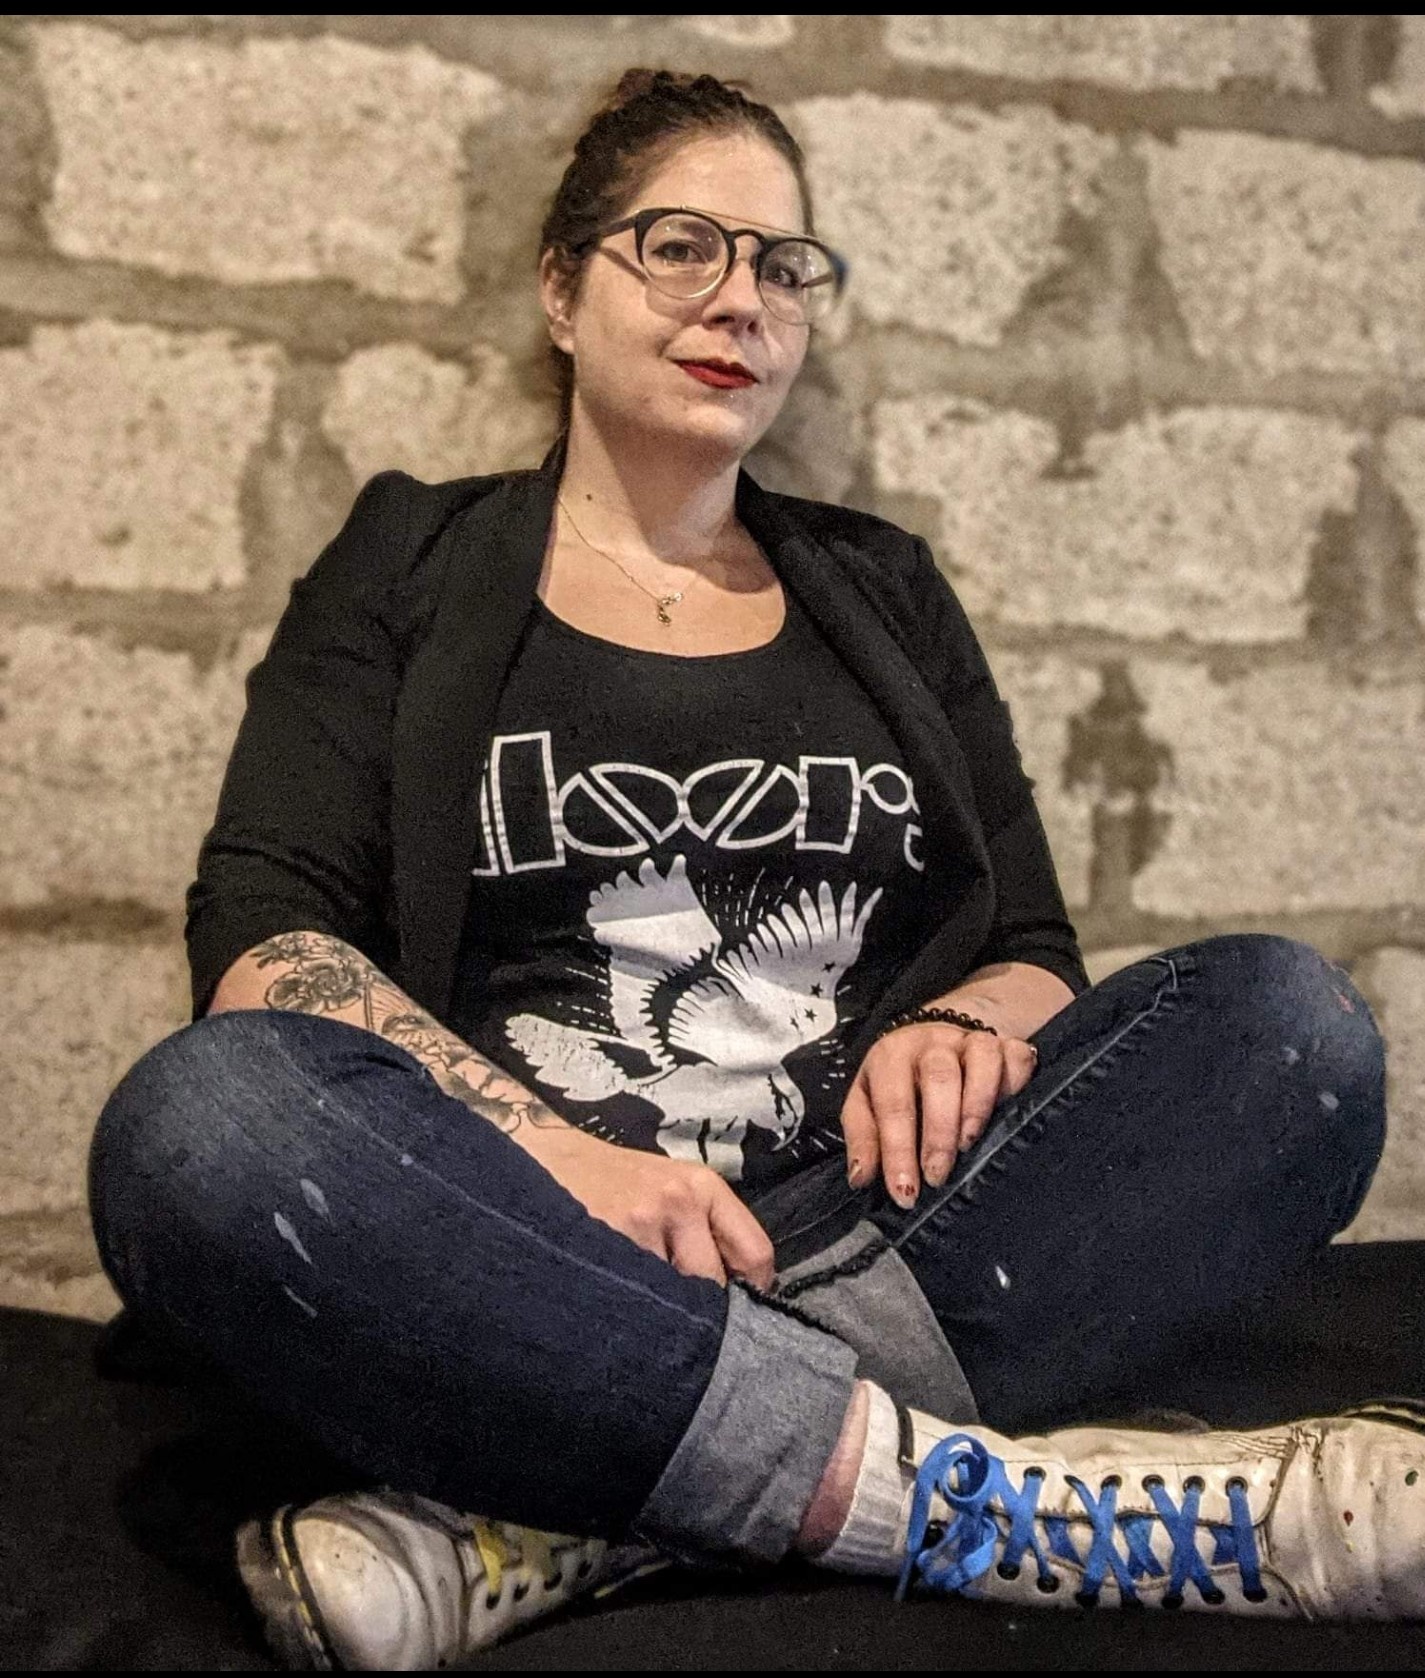 Alicia sits crossed legged against a brick wall and half-smiles at the camera. She wears Docs and a denim jacket over a t-shirt that says "Doors". 